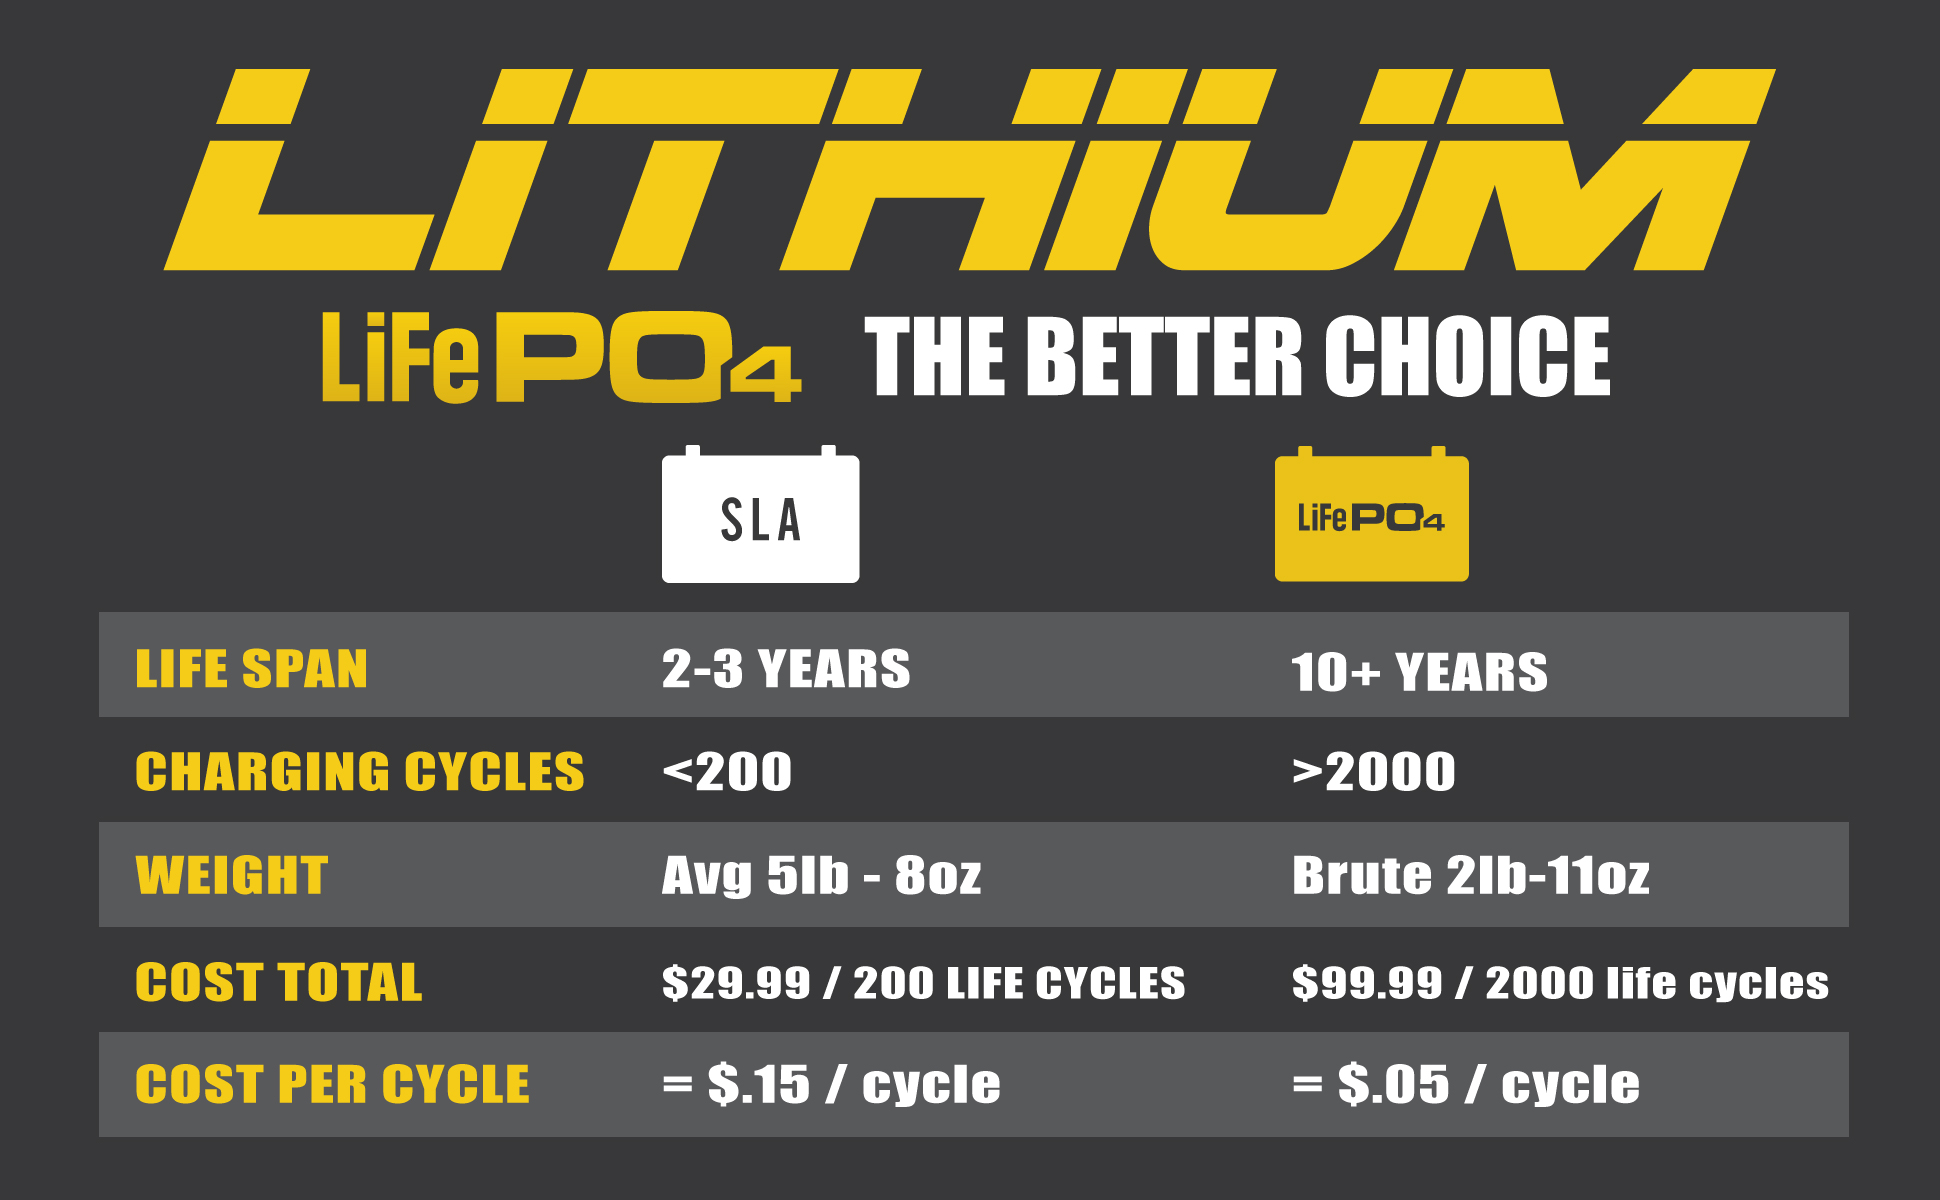 Discover the benefits of LiFePO4 batteries